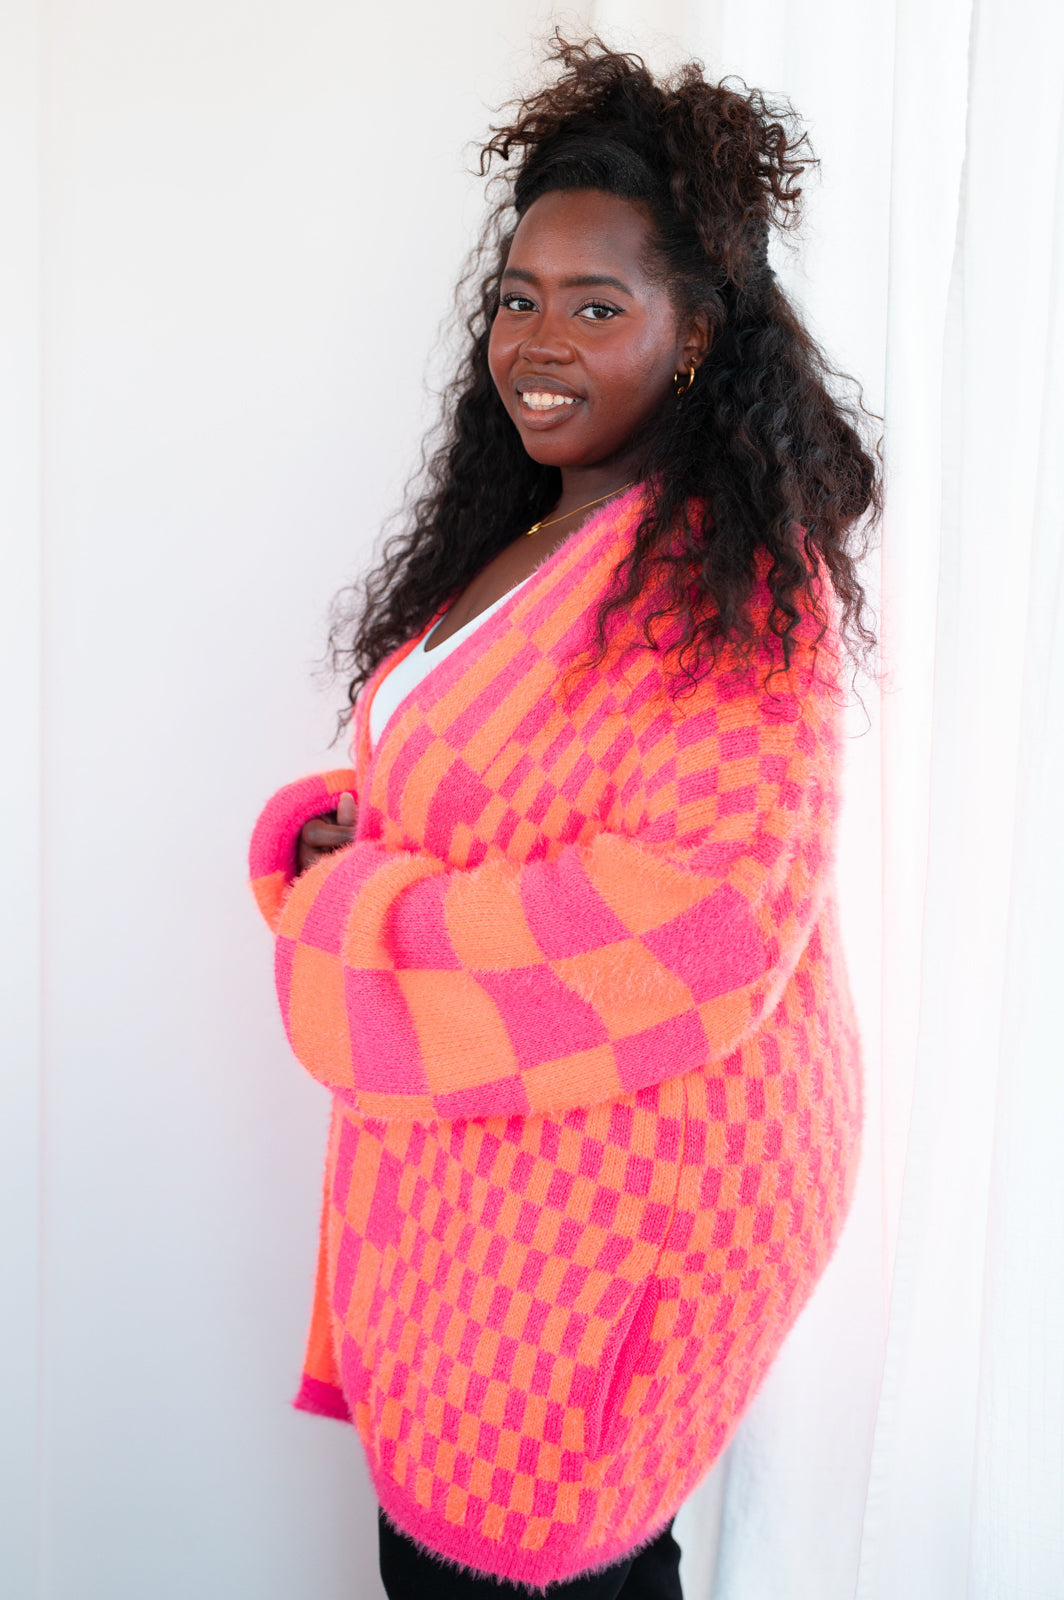 Stay warm and stylish in the Noticed in Neon Checkered Cardigan in Pink and Orange! This loud yet cozy cardigan features a sweater knit, and an open front design for a classic-yet-chic look